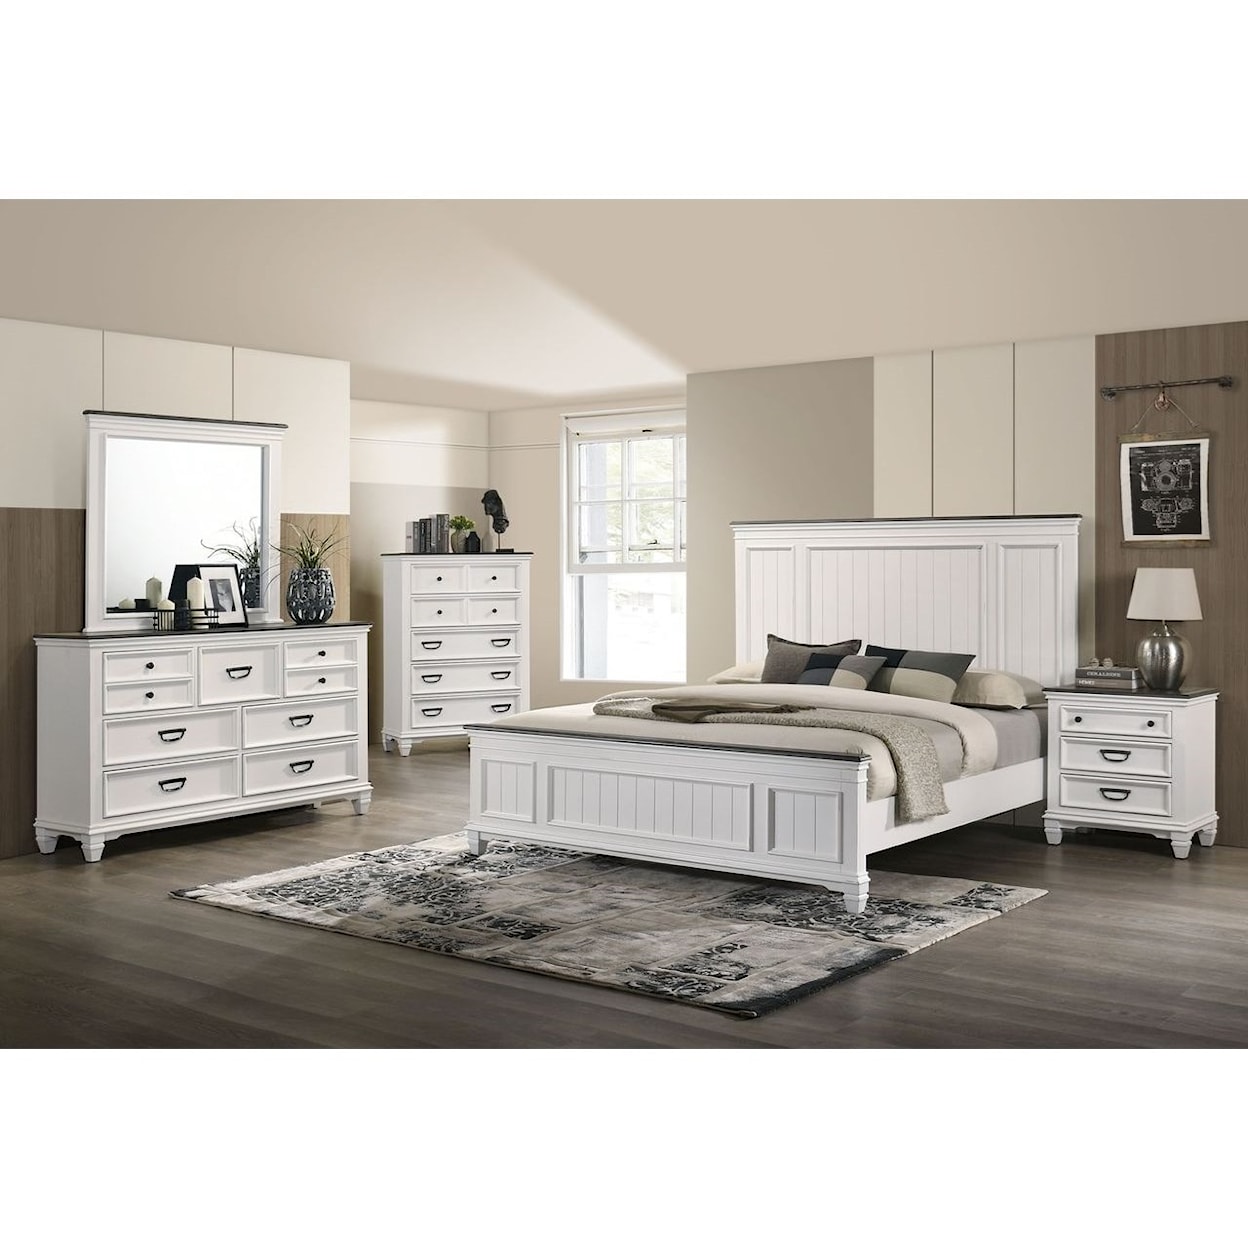 Lifestyle 8309 King Bedroom Group